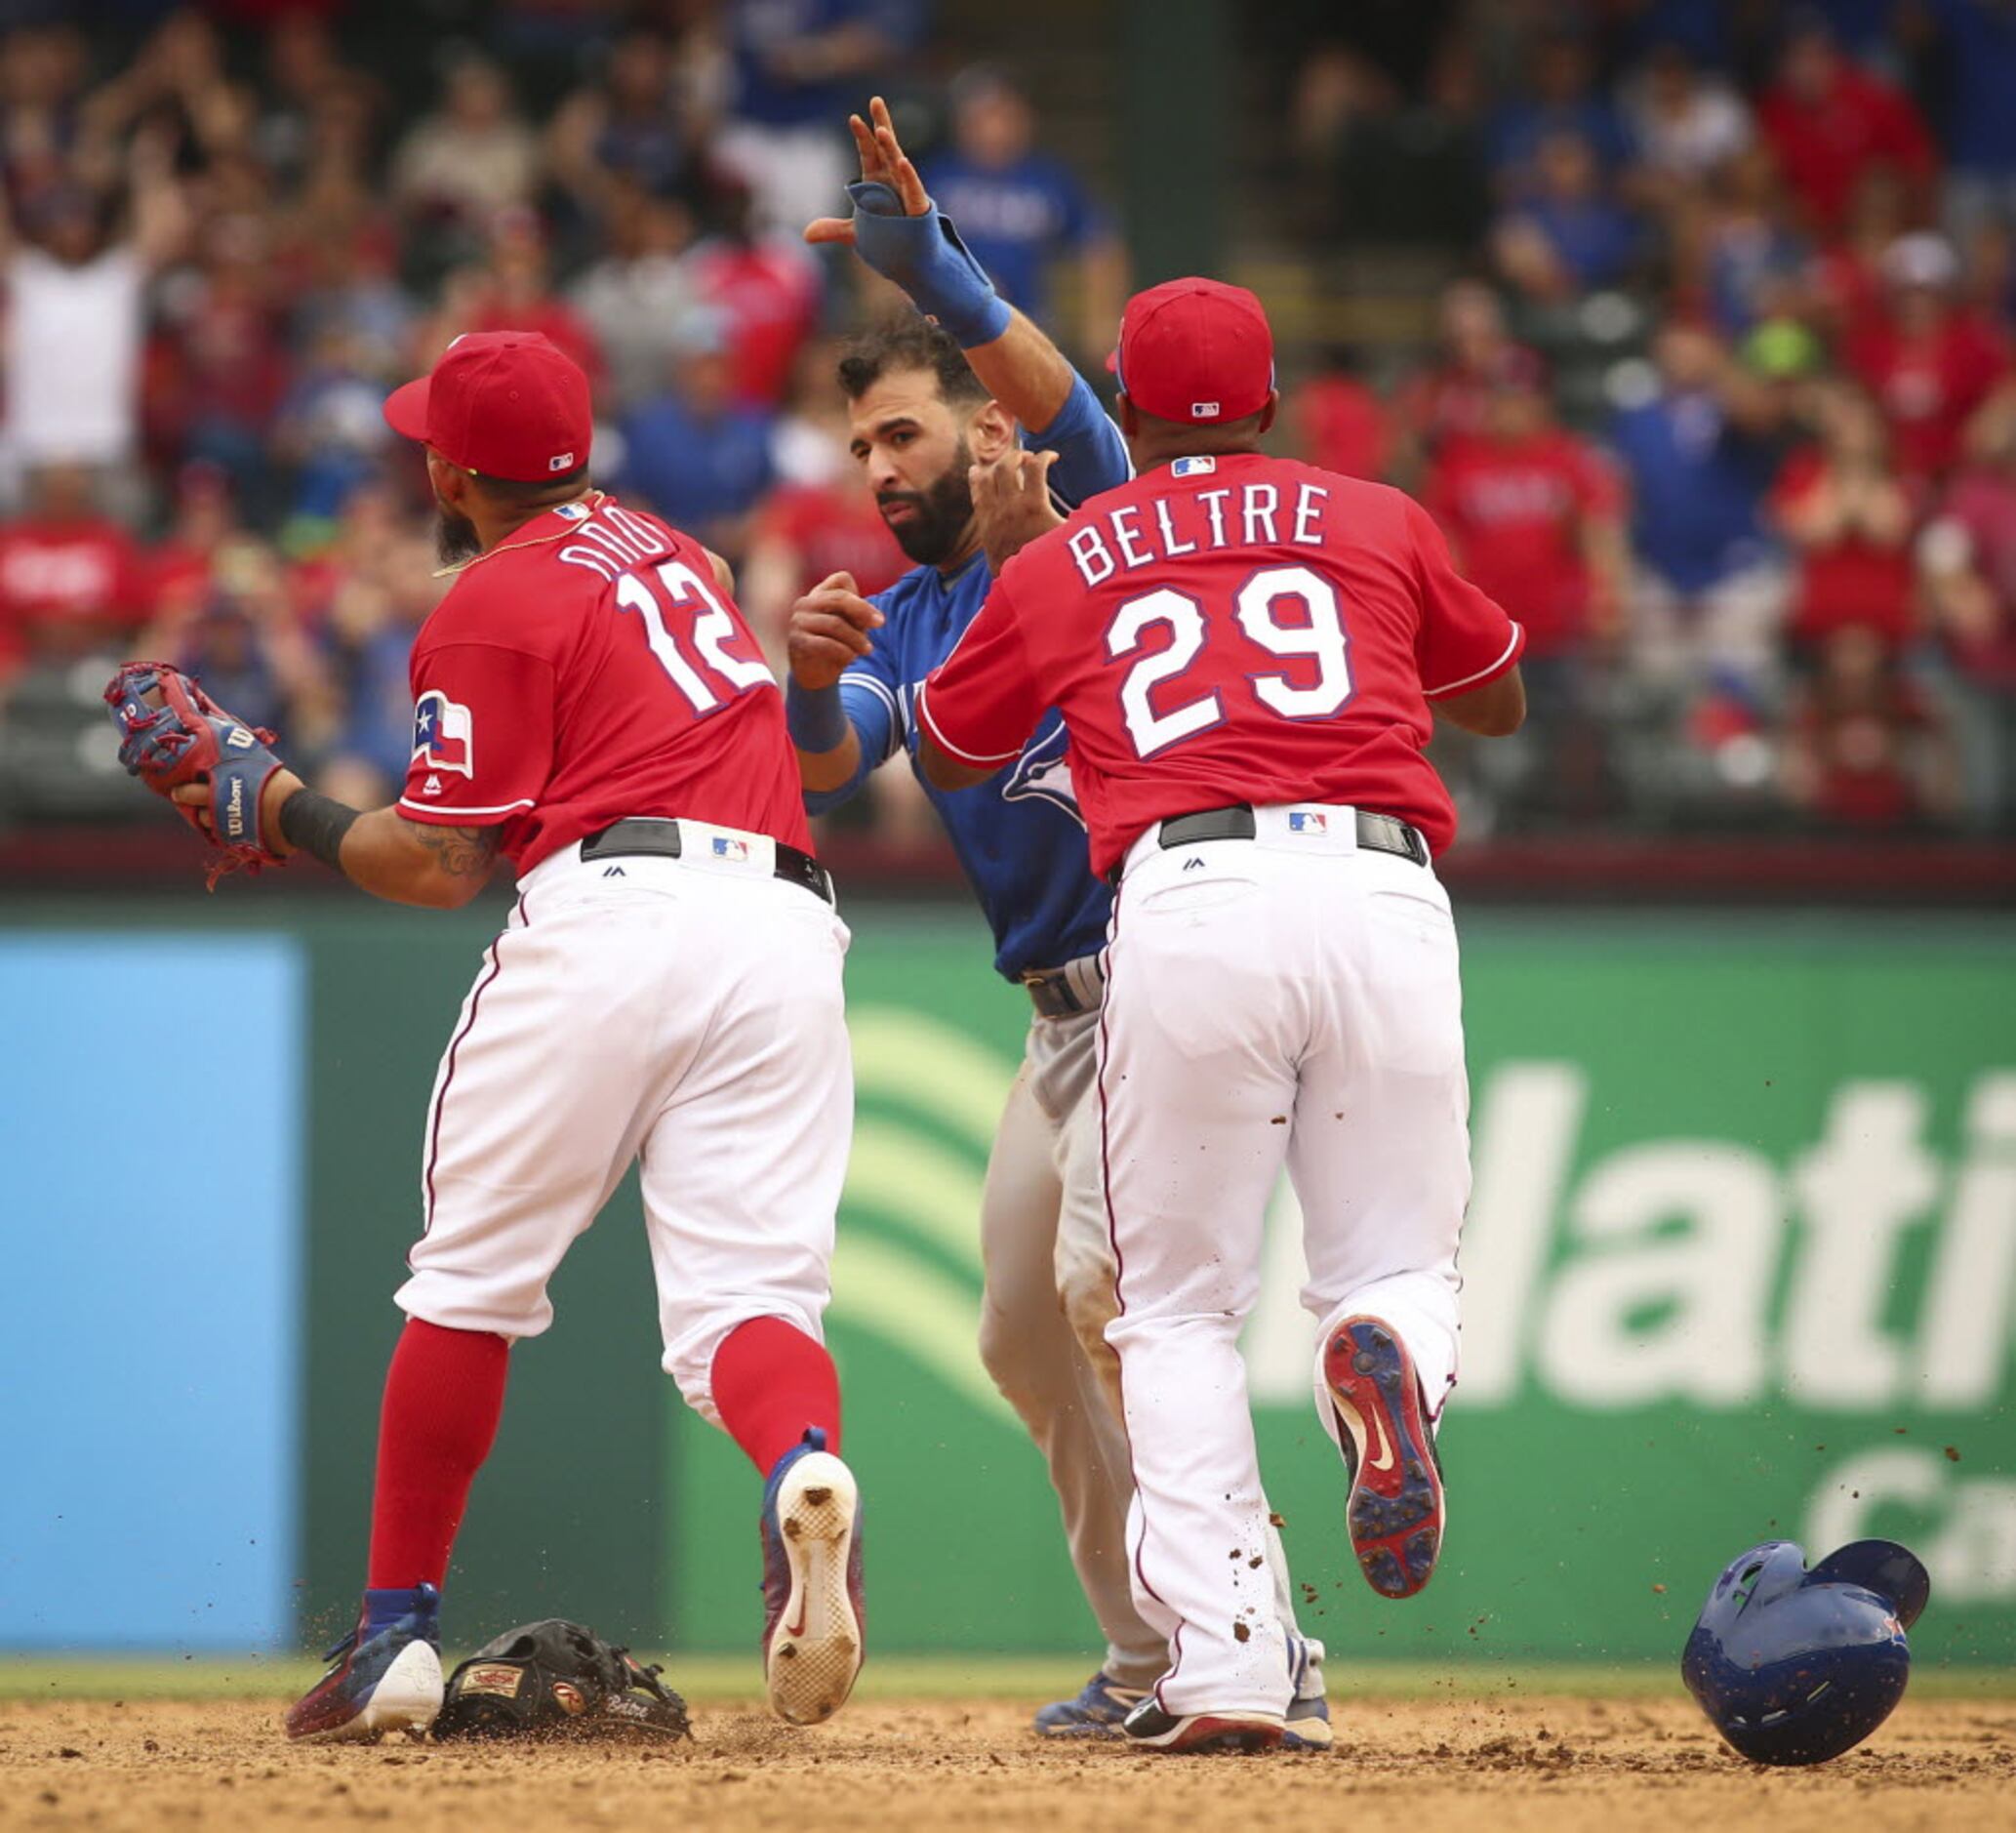 ESPN on X: Four years ago today, Rougned Odor punched Jose